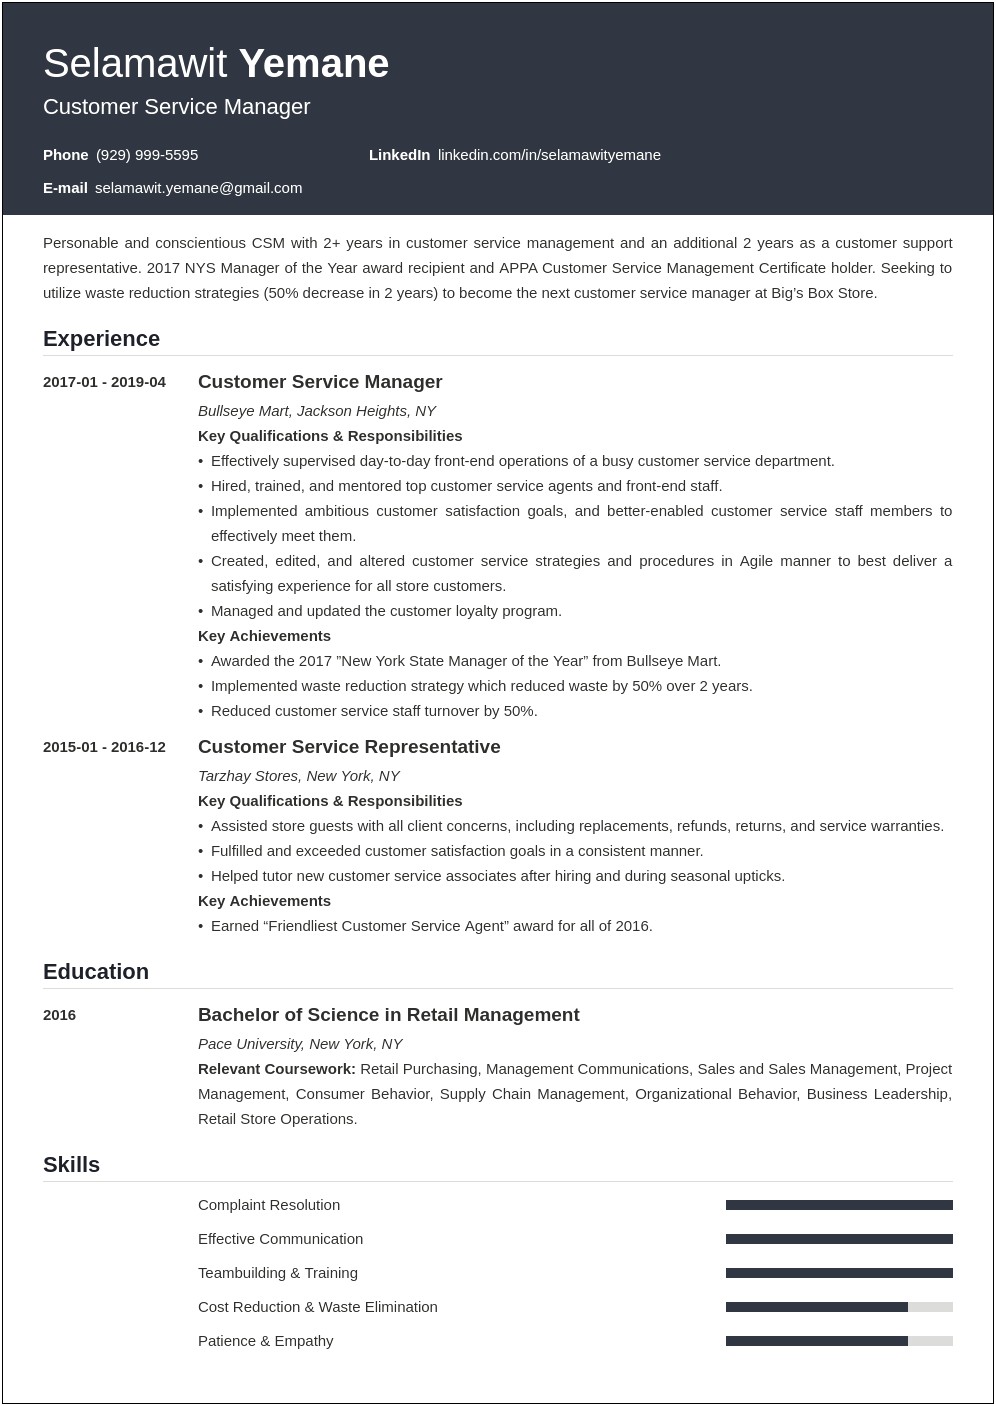 Resume Objective Satements Lower Level Management Customer Relations